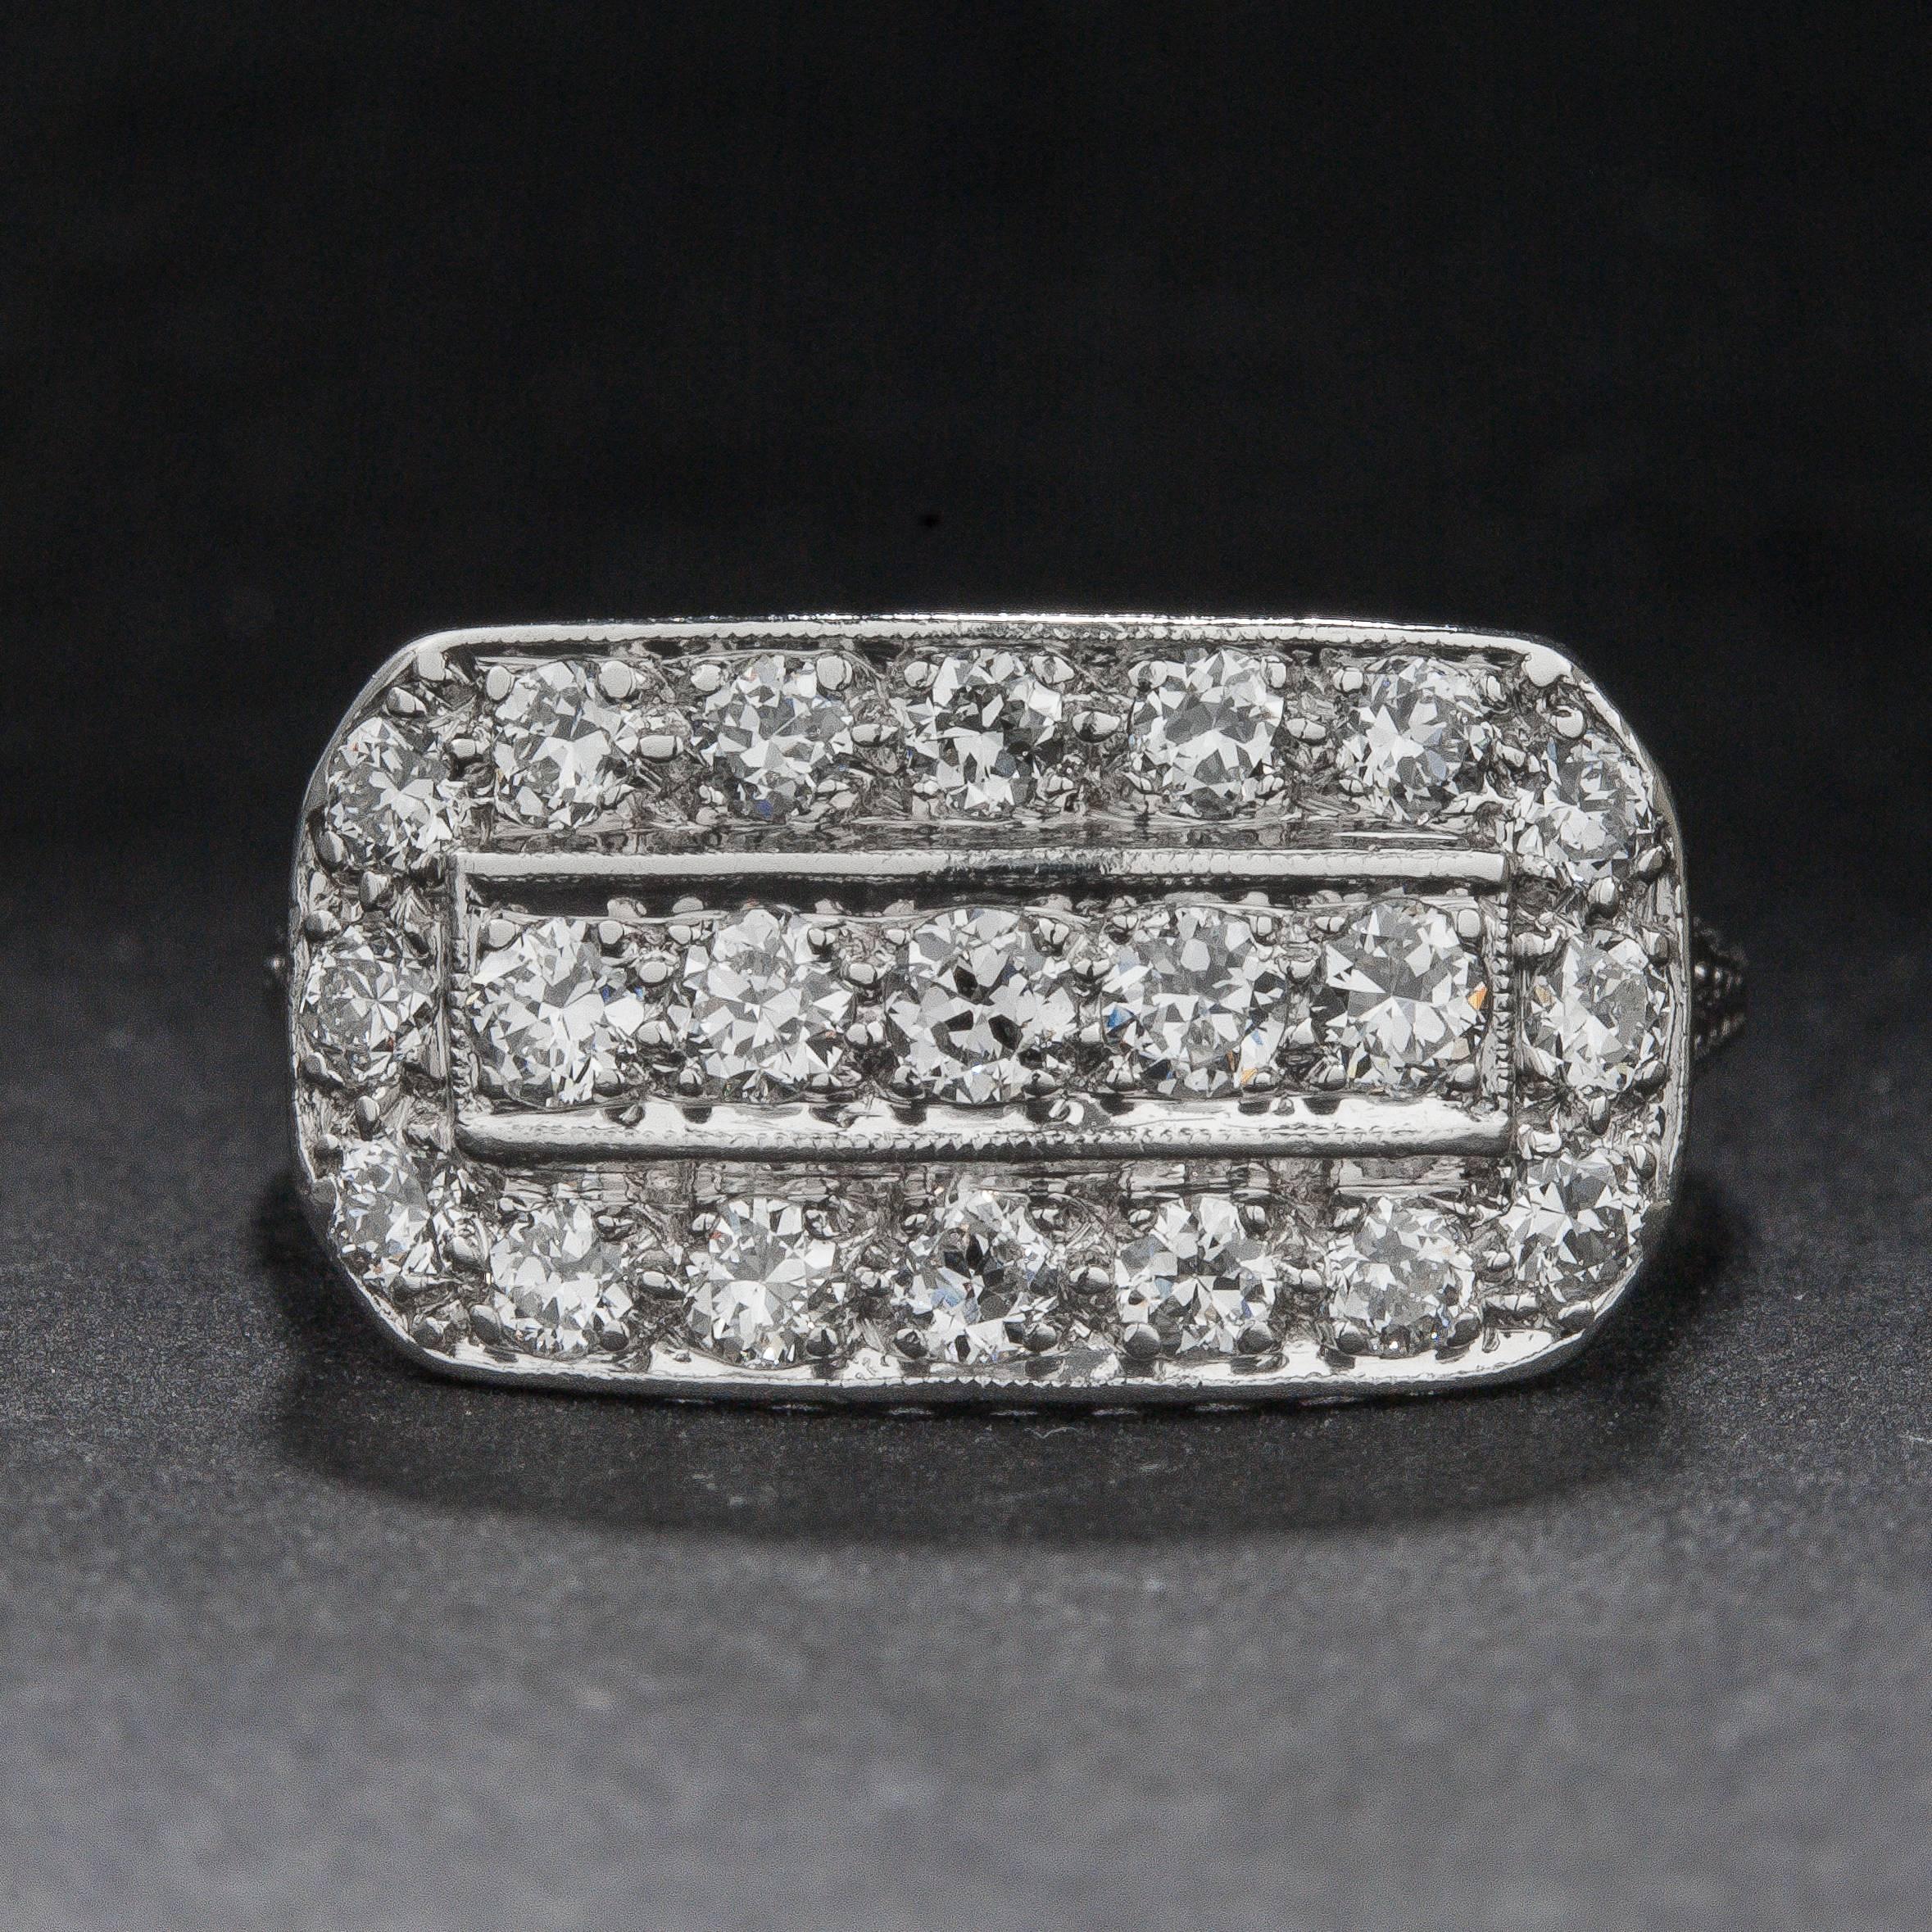 A striking Art Deco style right-hand ring with .60 total carats of diamonds. The ring is crafted in platinum and features beautiful engraving along the shank.

This ring is currently size 6.75 and can be sized to fit.